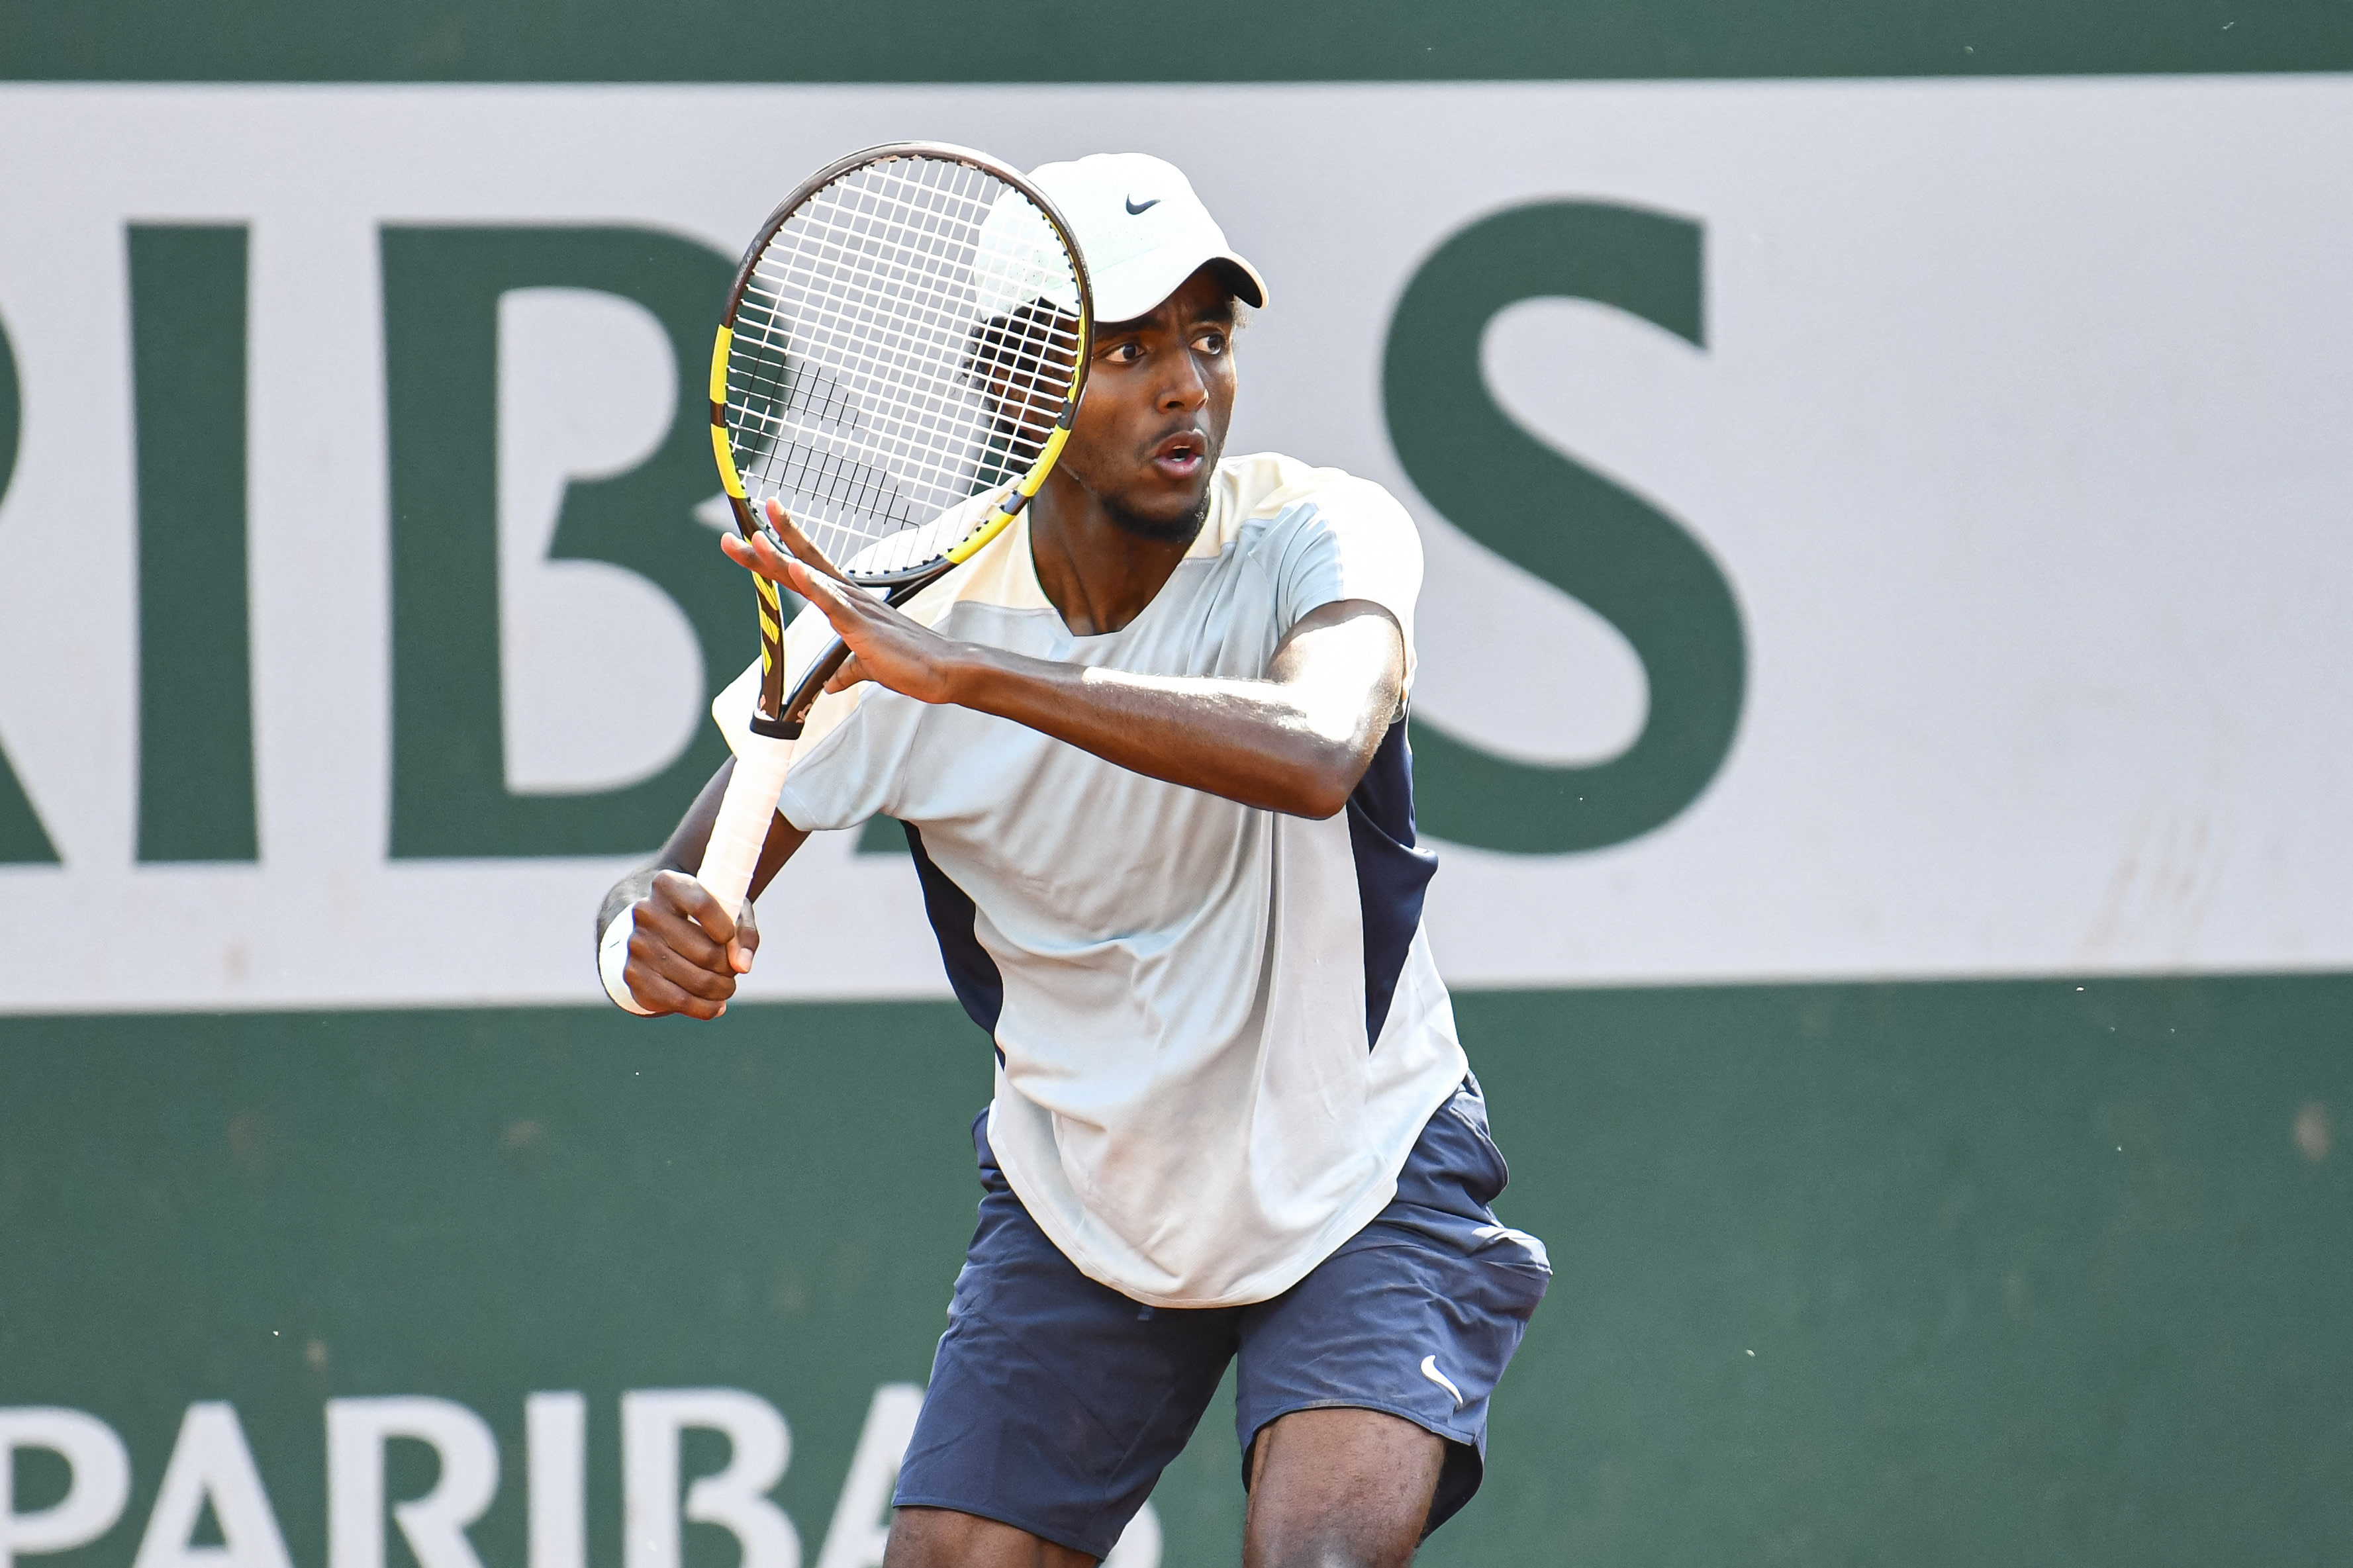 Elias Ymer destroys a camera at Salzburg Challenger, only gets a warning